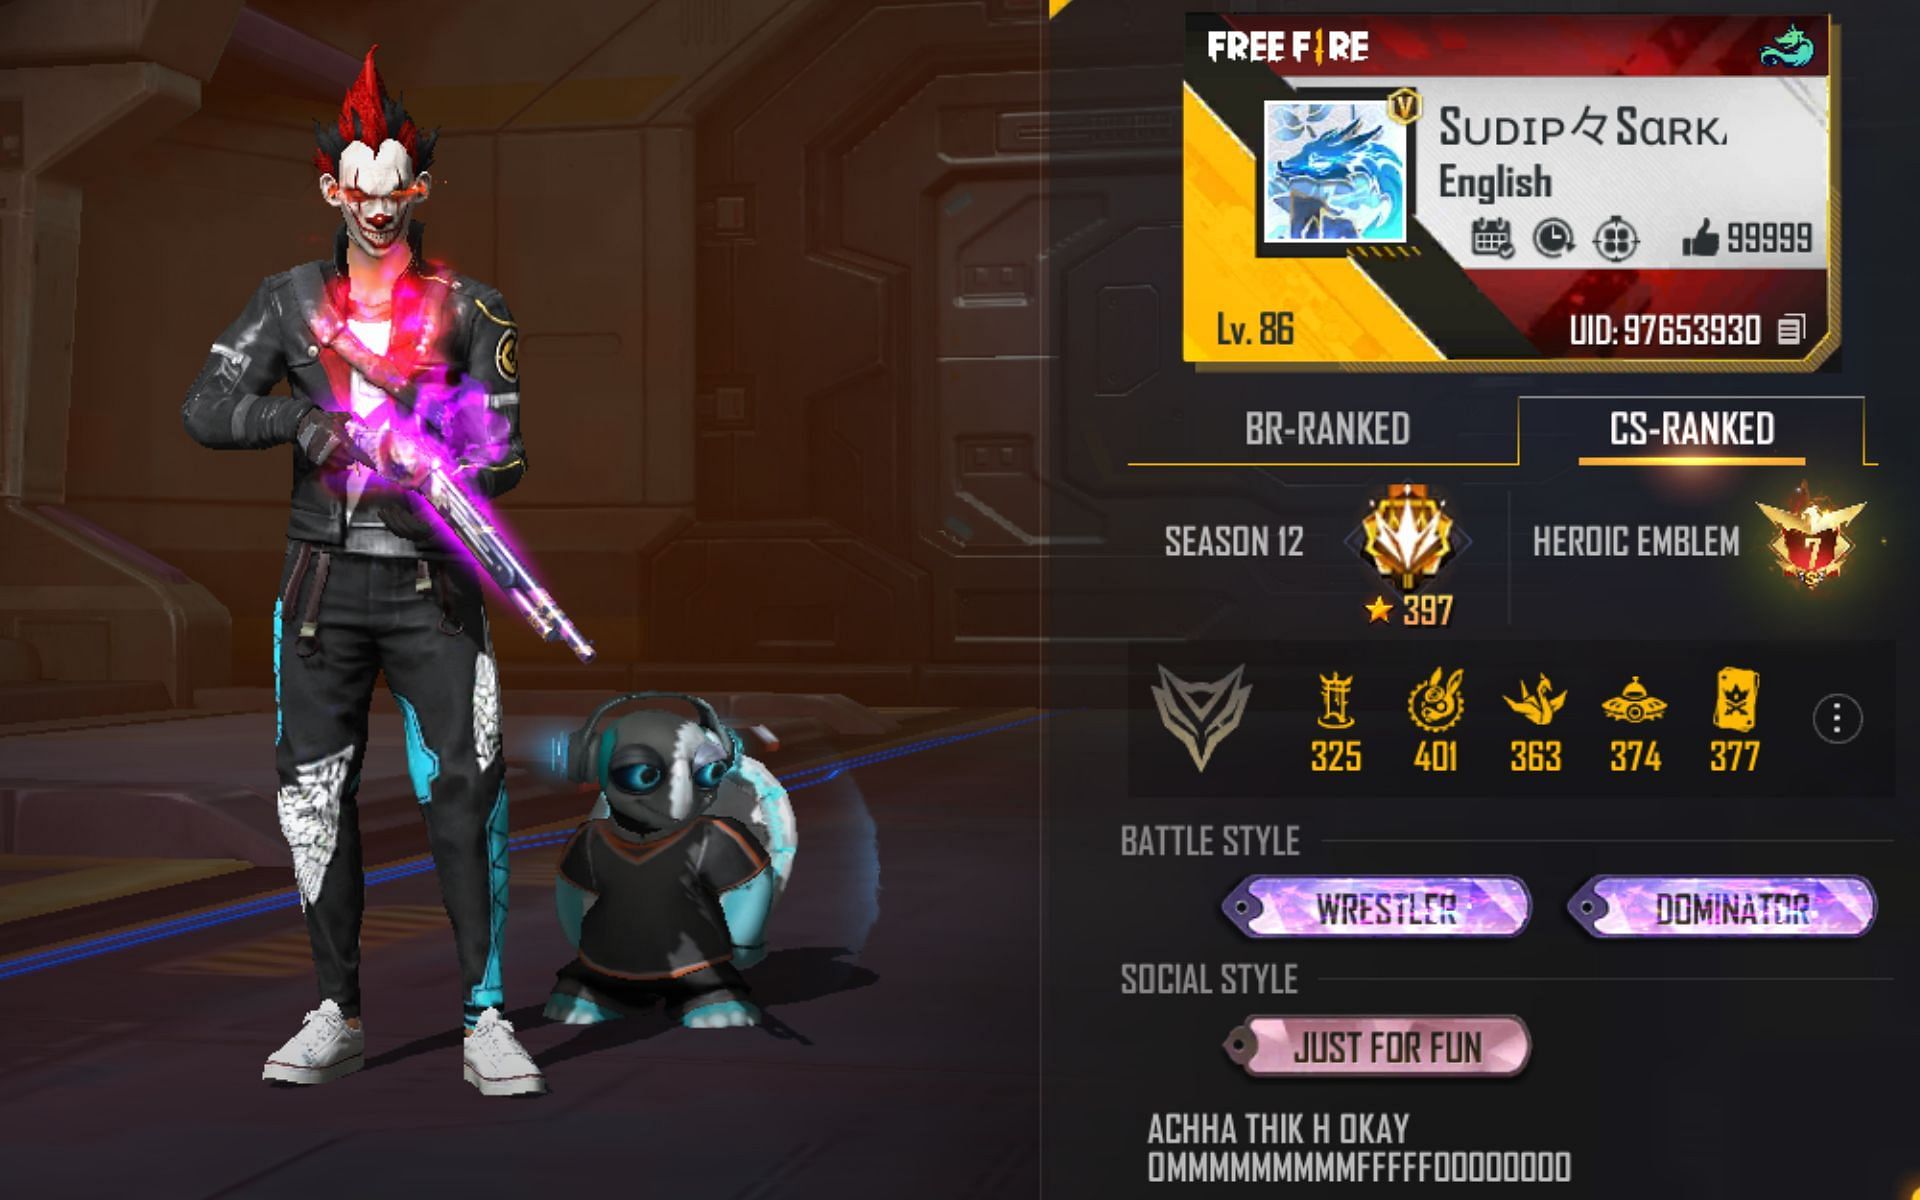 Sudip Sarkar's Free Fire ID, stats, Discord link, monthly income